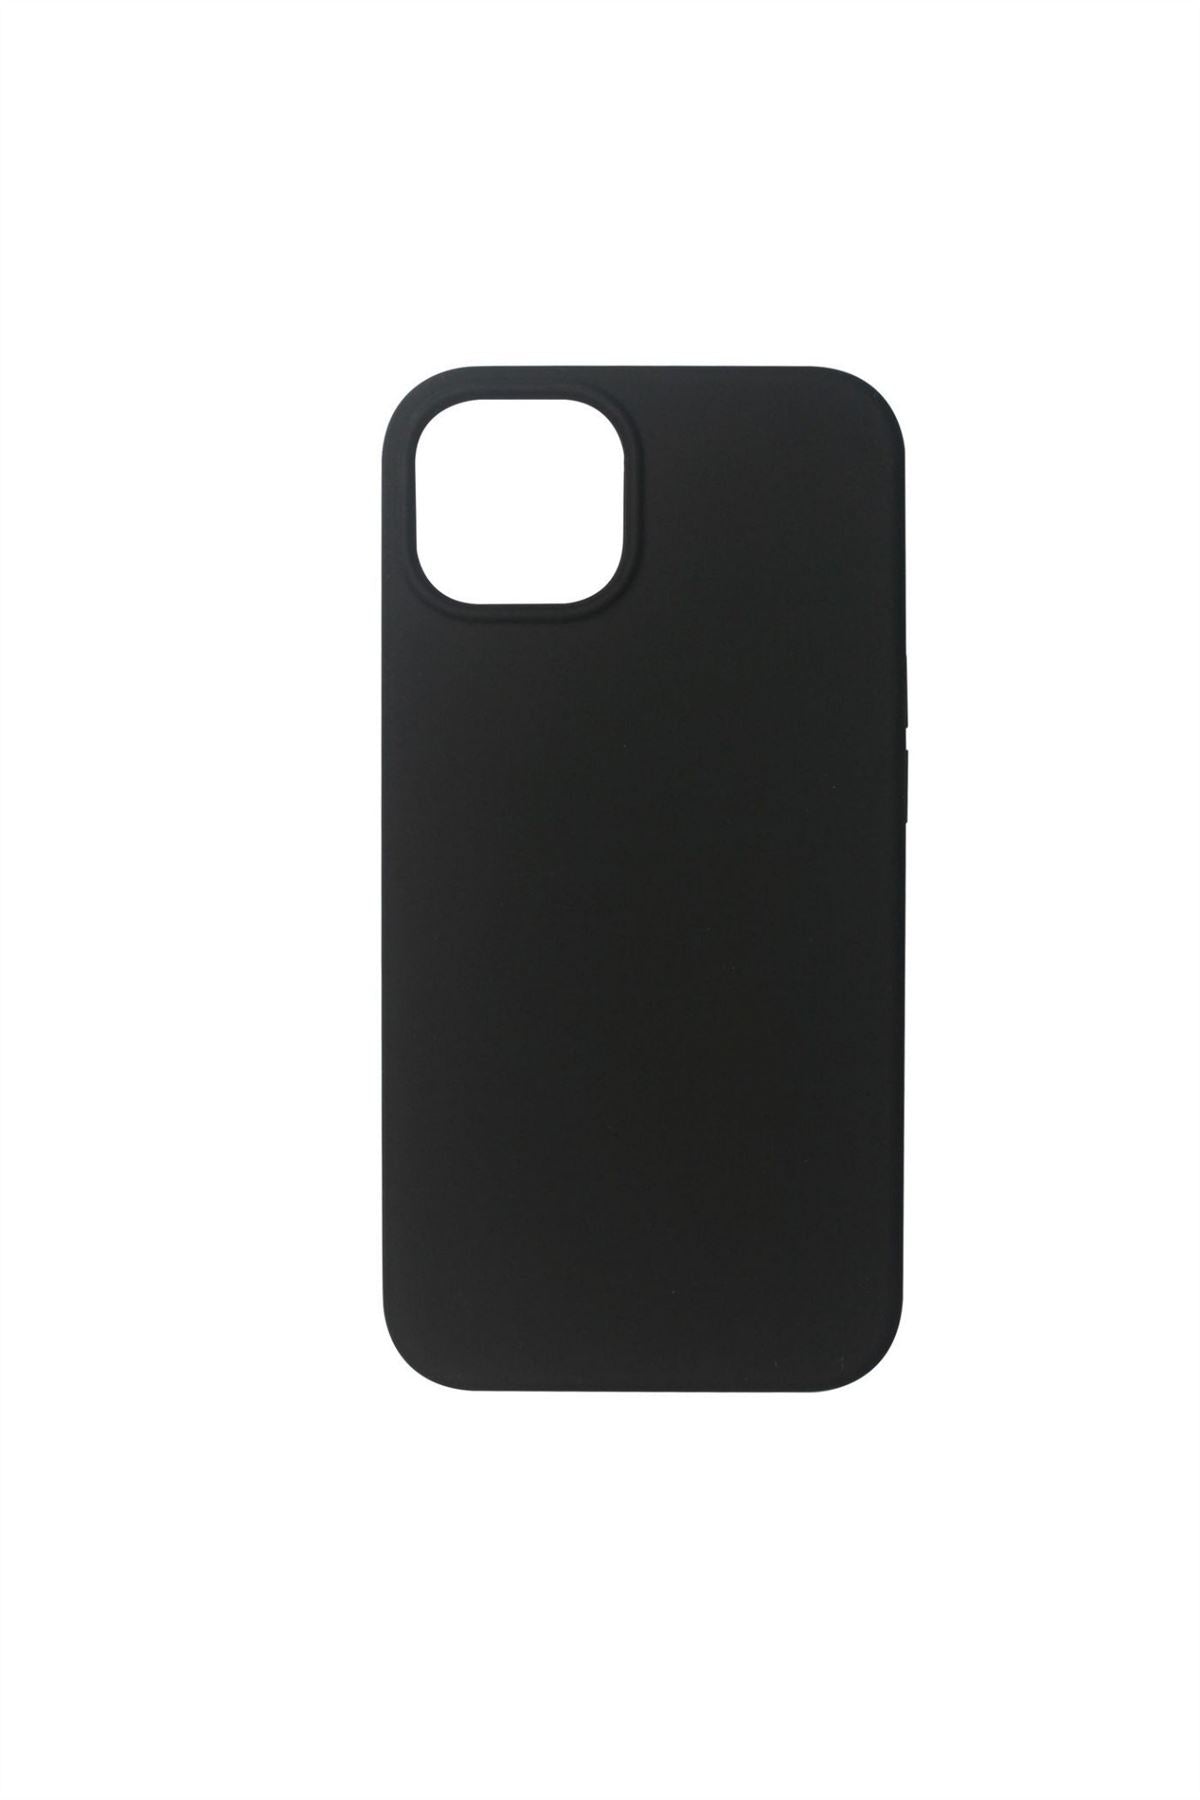 eSTUFF Black silk-touch silicone case for iPhone 13 mobile phone case 15.5 cm (6.1&quot;) Cover